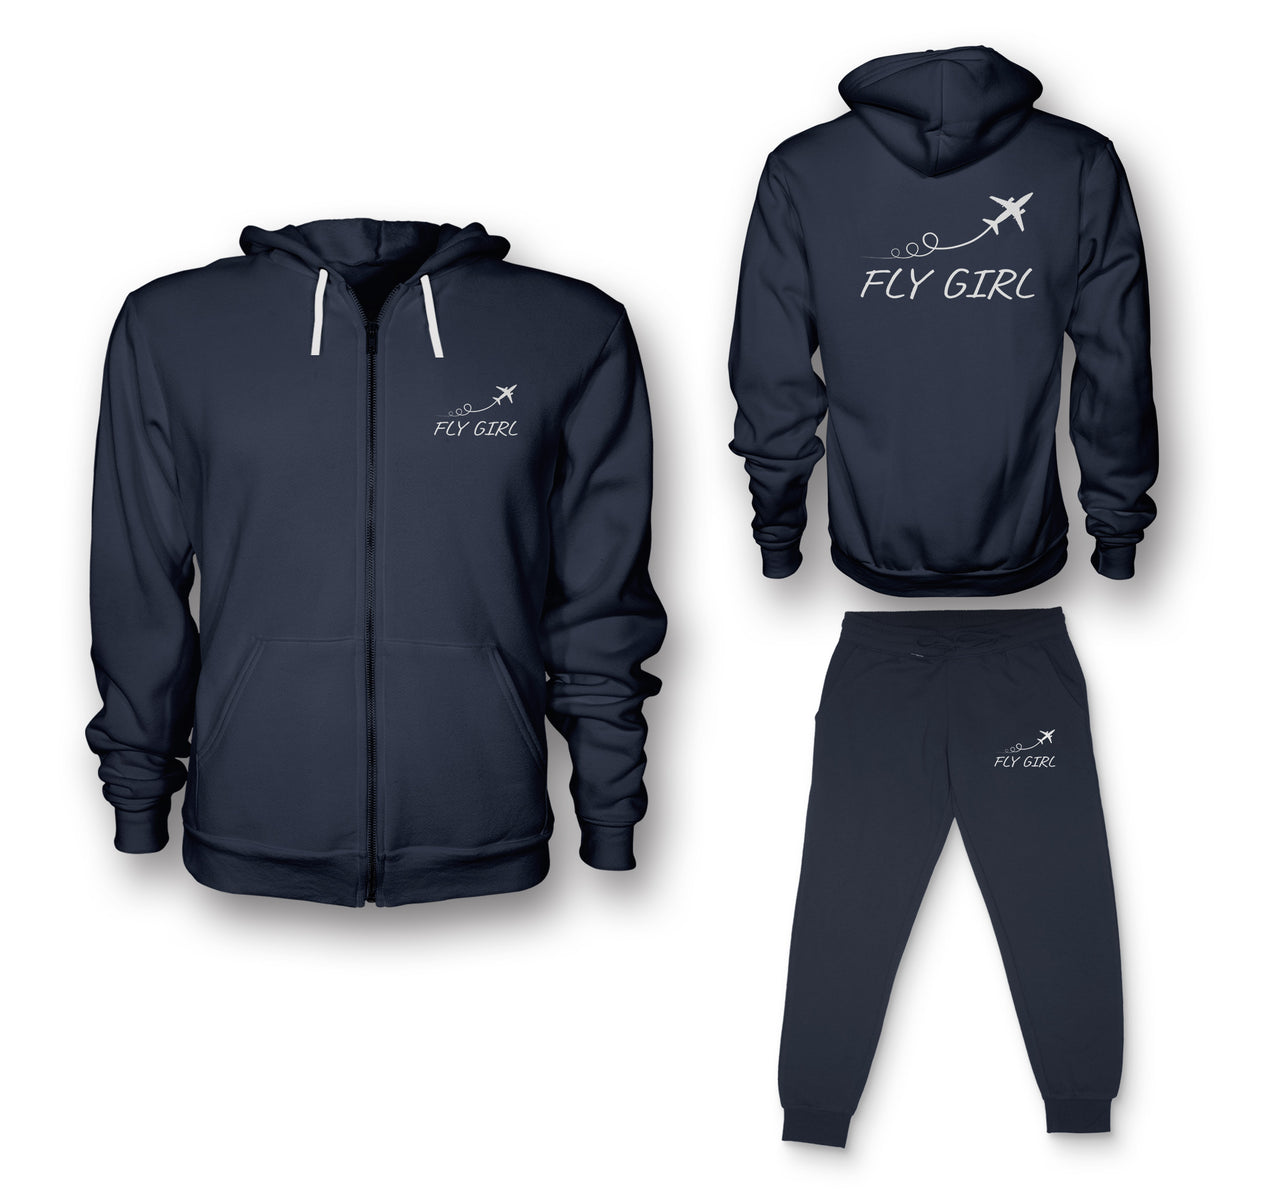 Just Fly It & Fly Girl Designed Zipped Hoodies & Sweatpants Set